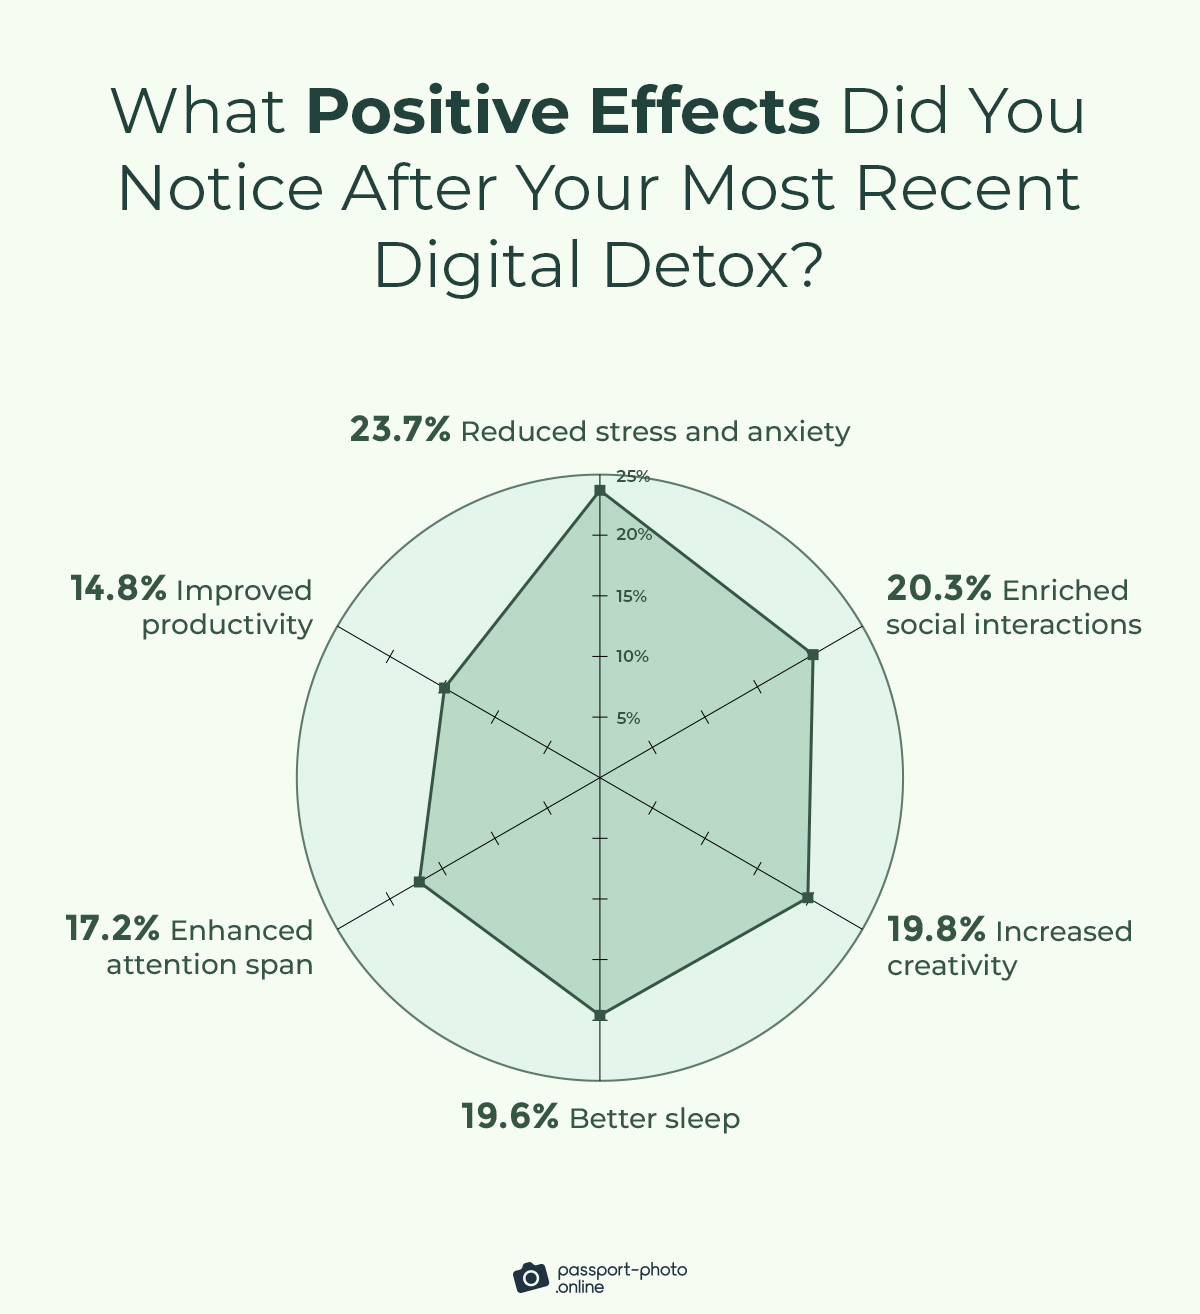 “reduced stress and anxiety” was voted the most common positive effect of taking a digital detox at 24%